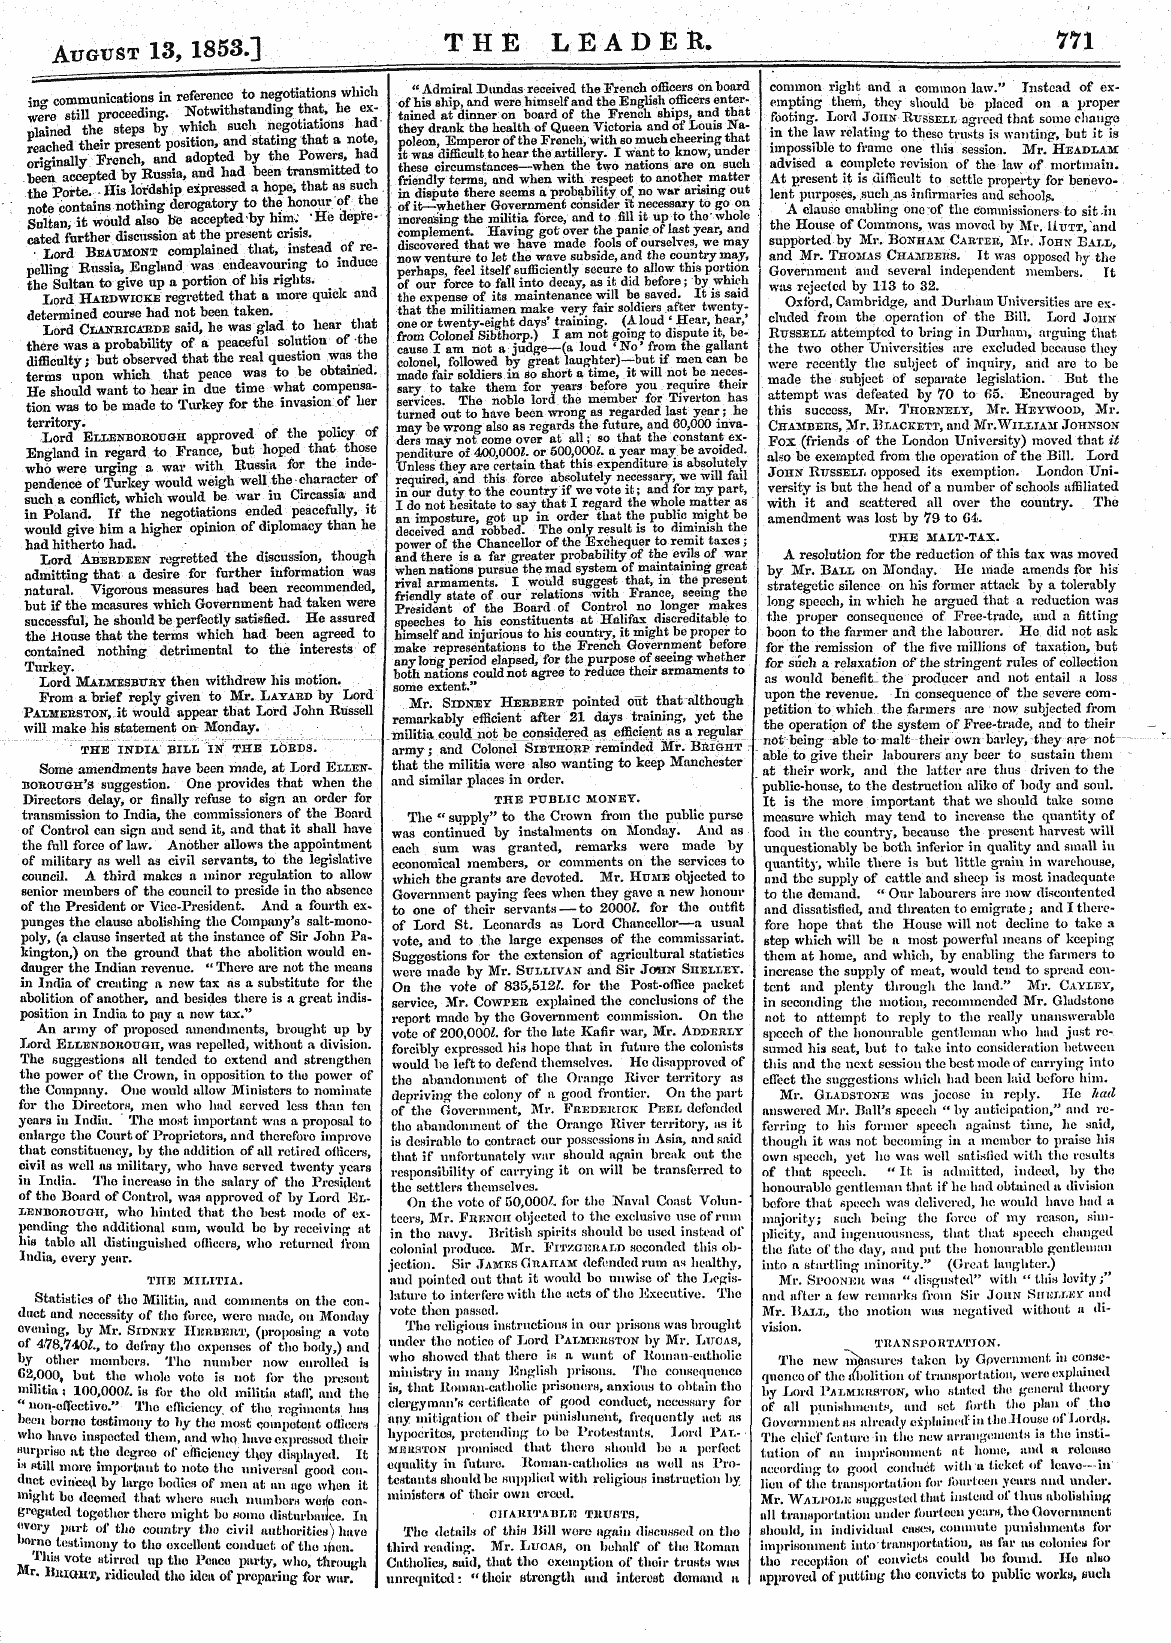 Leader (1850-1860): jS F Y, Country edition - August 13, 1853.] The Leader. Ill